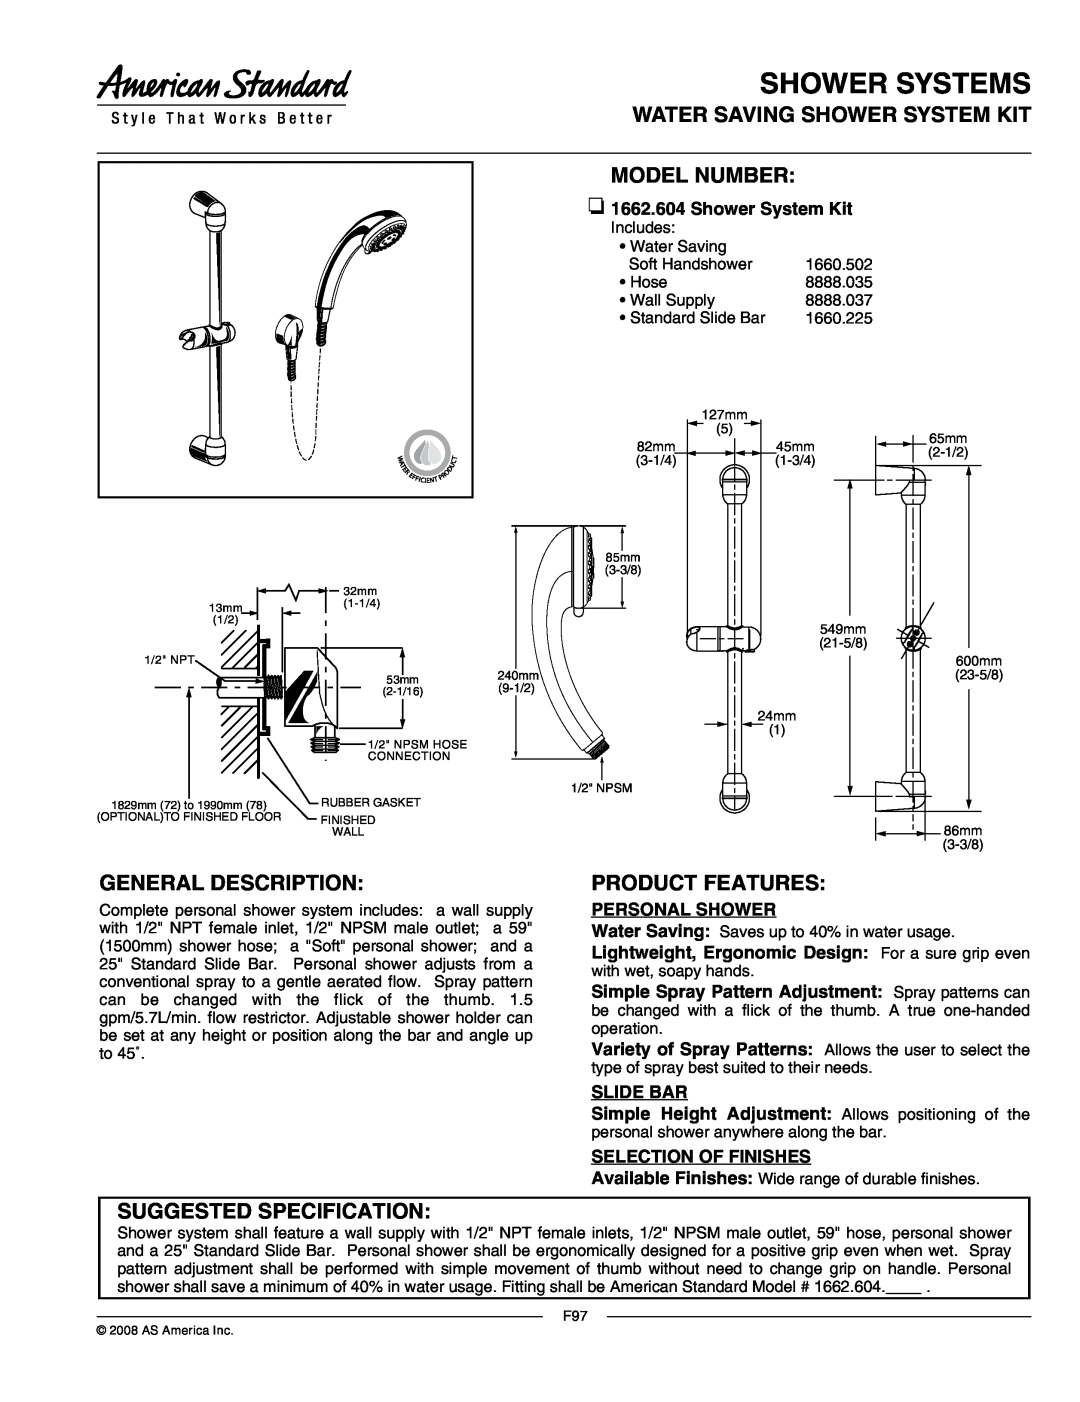 American Standard 8888.037 specifications Shower Systems, water saving SHOWER SYSTEM KIT, Model Number, Product Features 